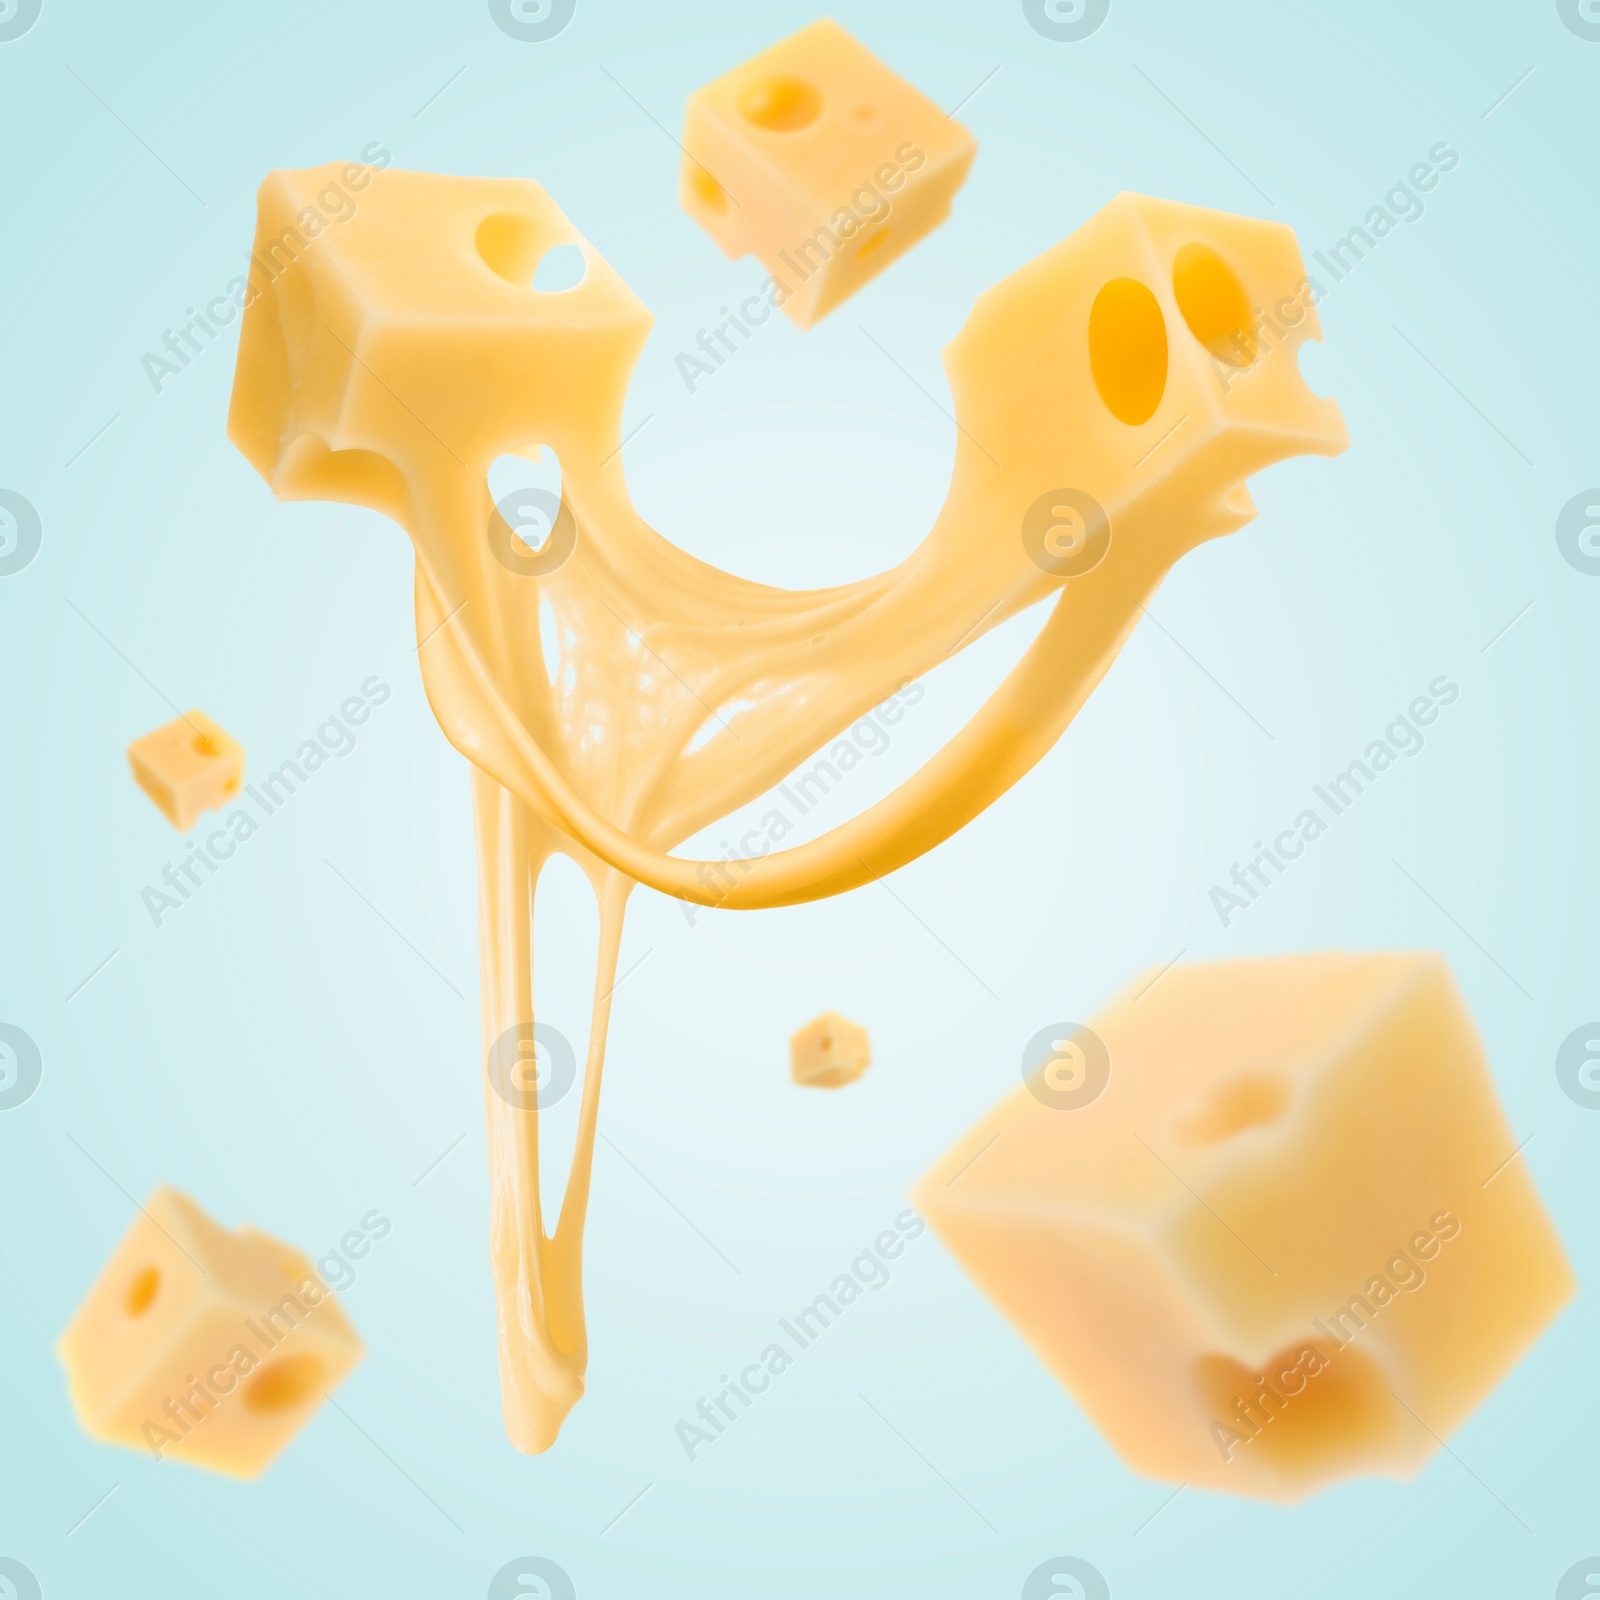 Image of Piecescheese falling on light blue background